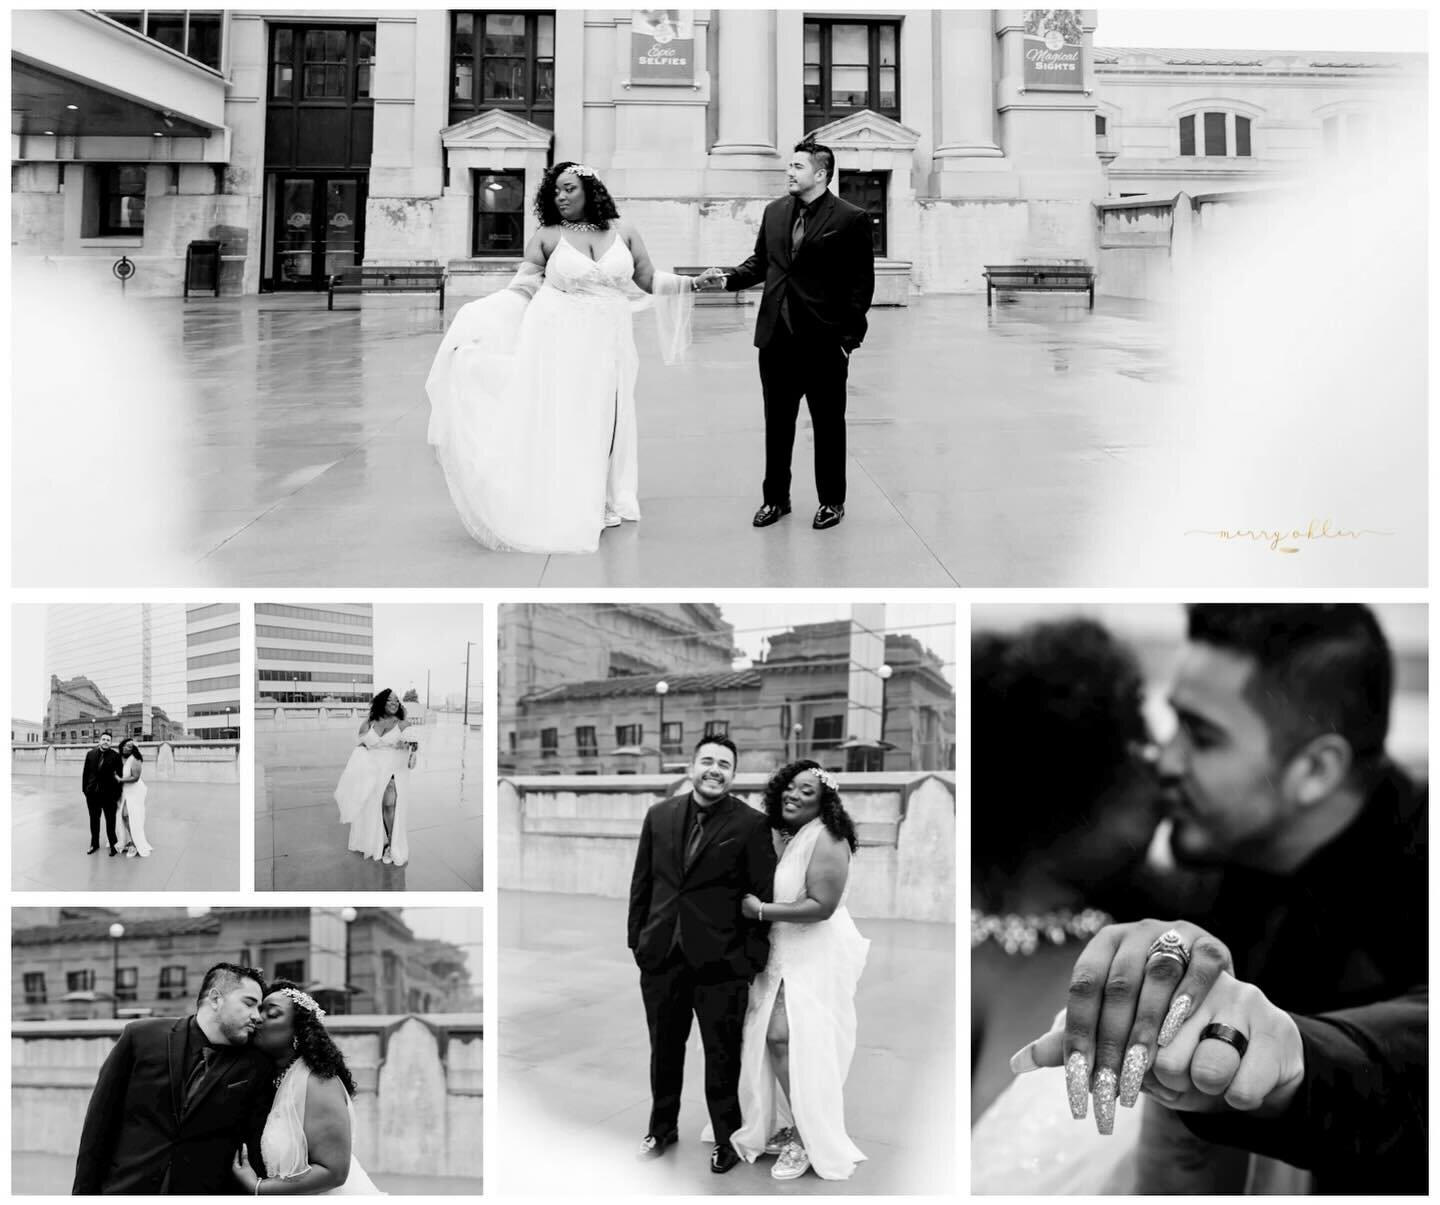 Overcast skies and a little rain 🌧 didn&rsquo;t dampen Ashton and Ricky&rsquo;s smiles! The elegant downtown location lent a classic Kansas City vibe to their wedding portraits. There&rsquo;s something so timeless and romantic about black and white 